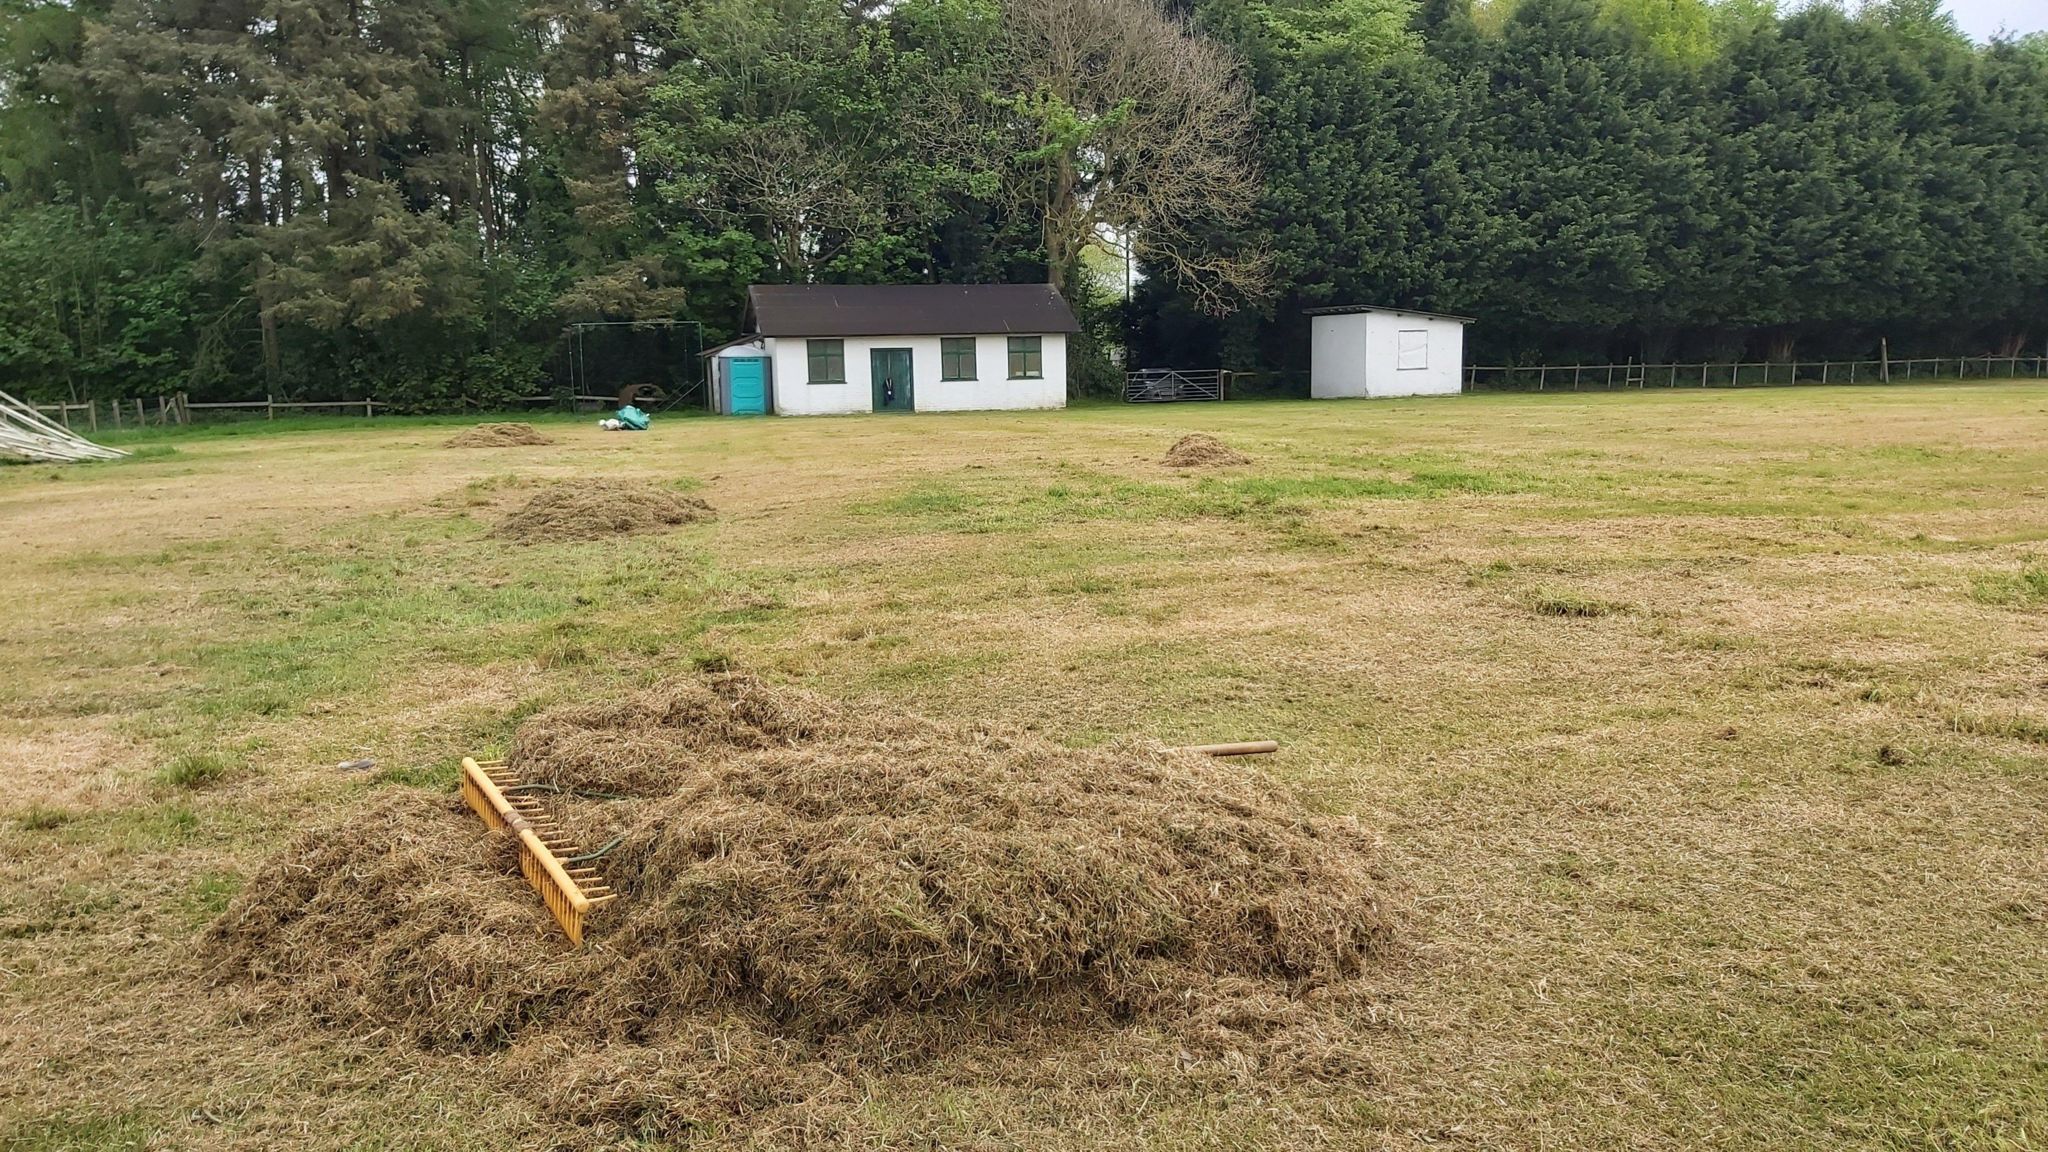 Grass cuttings raked together into a pile